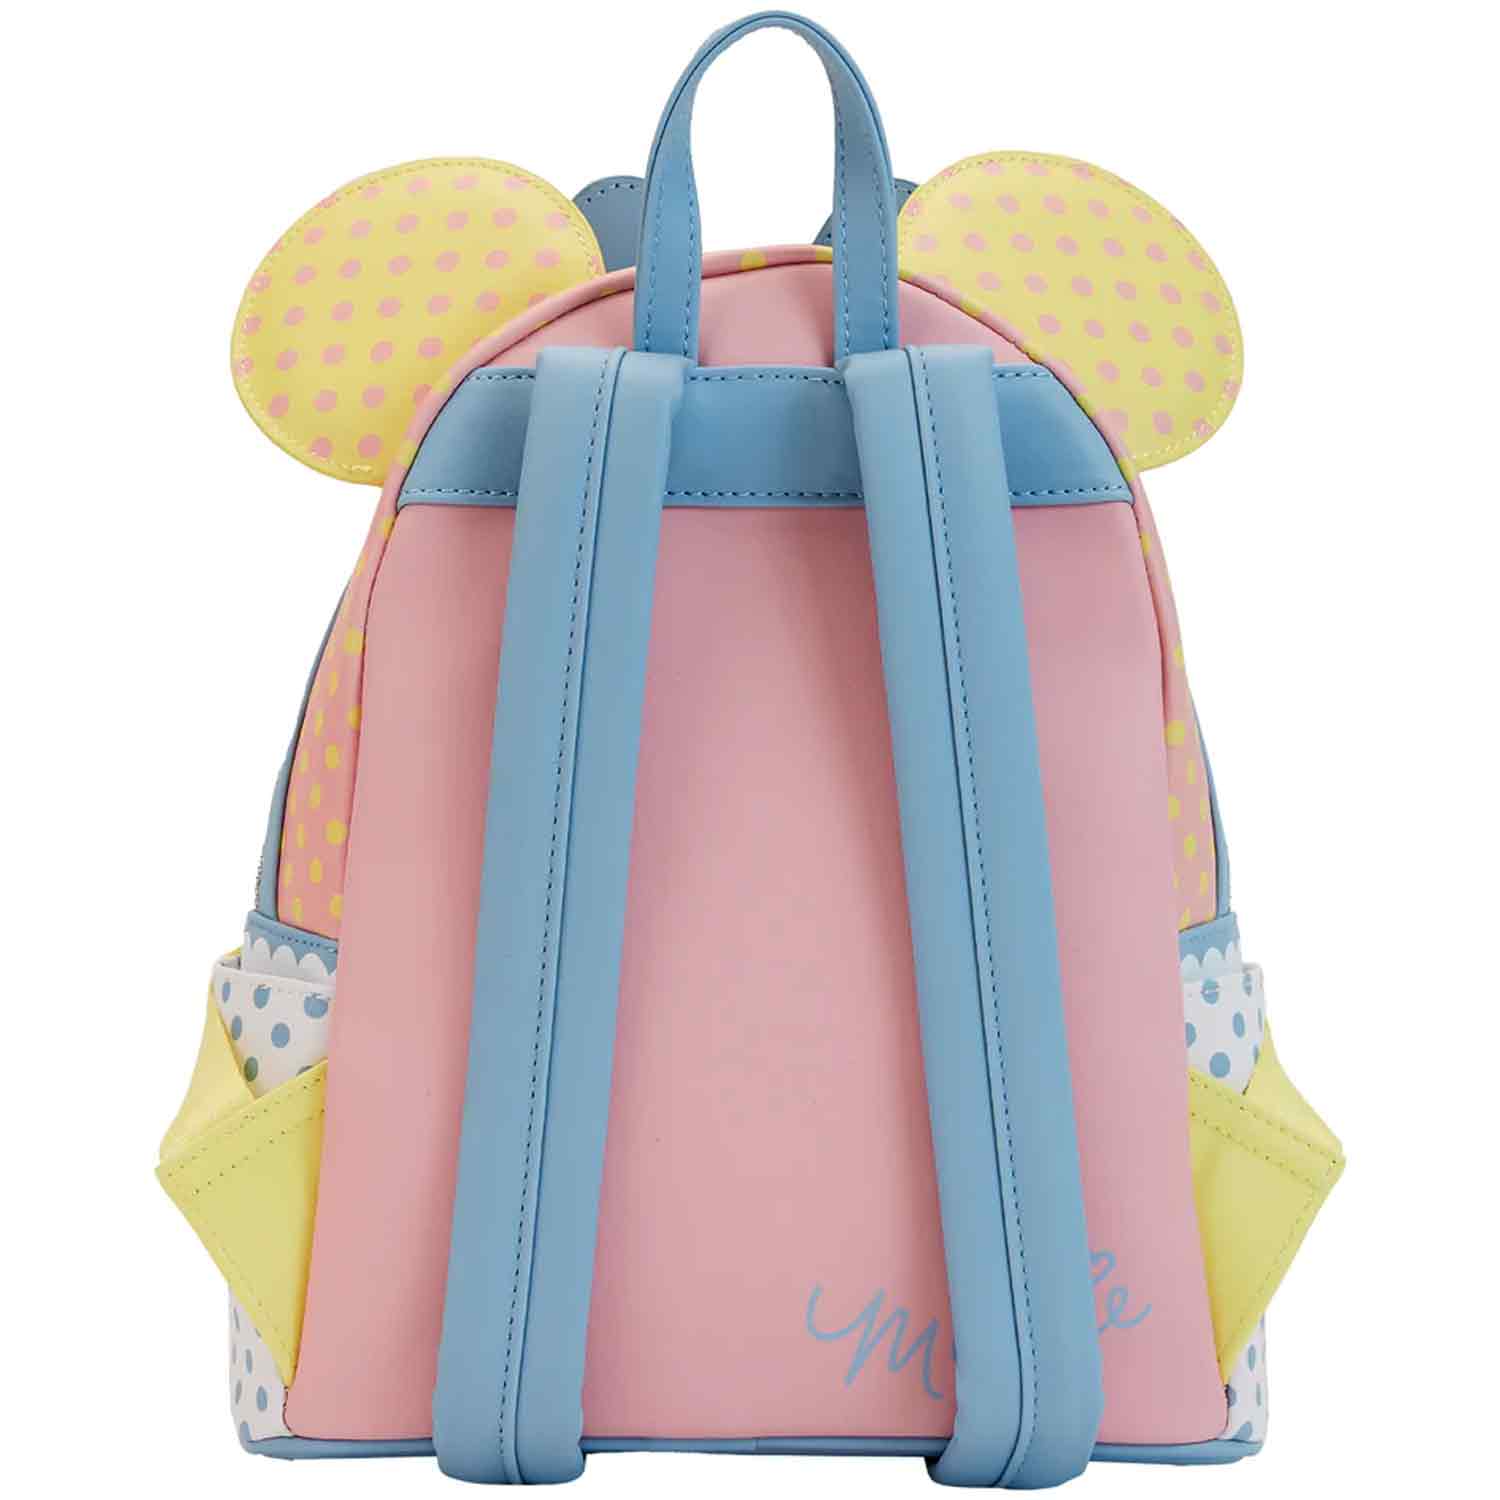 Loungefly x Disney Minnie Mouse Pastel Polka Dot Mini Backpack - GeekCore